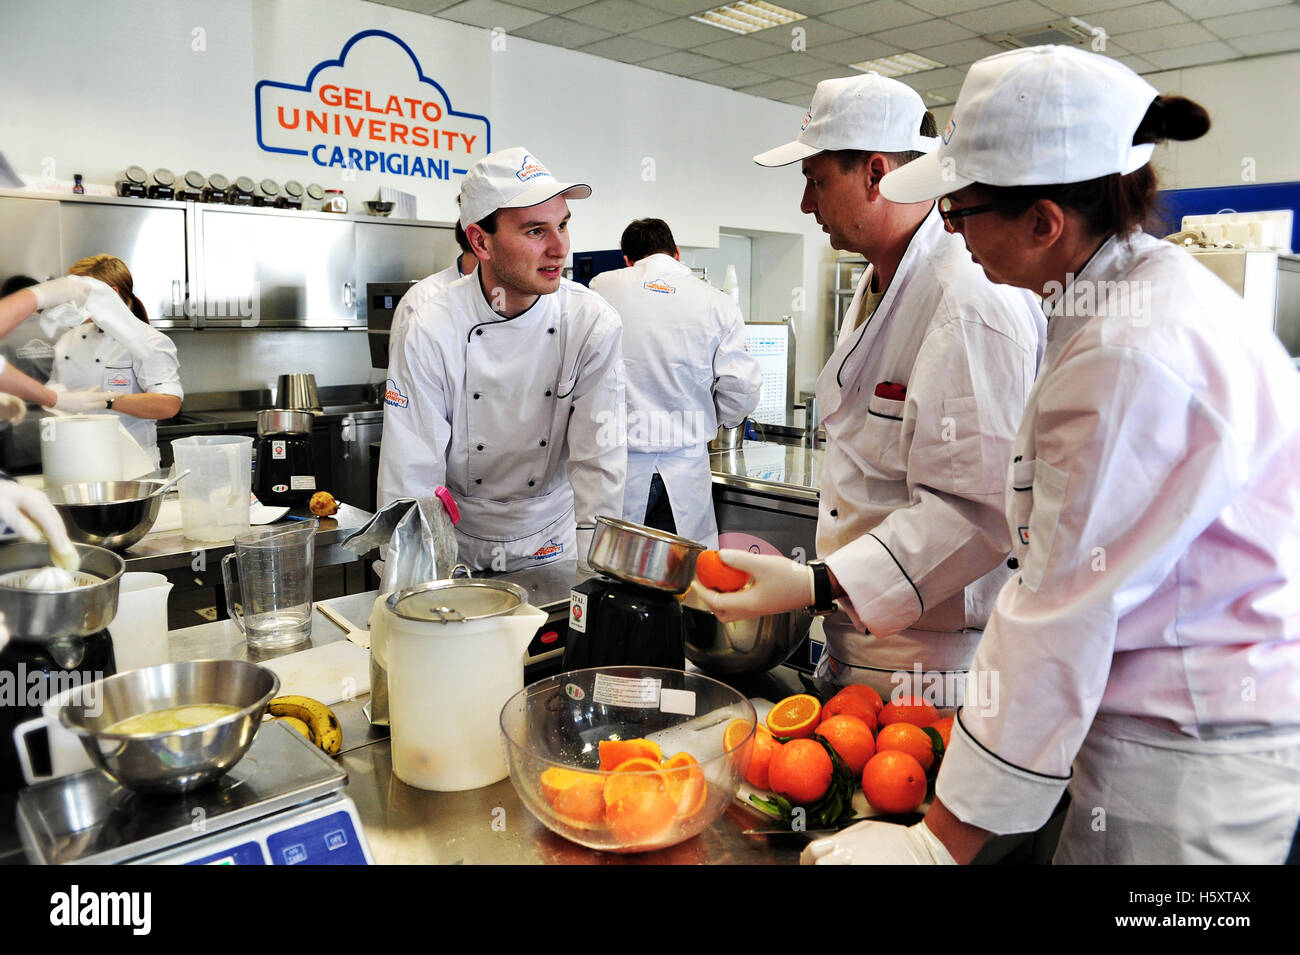 Students at work during a practical lesson at the Carpigiani Gelato University in Anzola nell'Emilia, Italy Stock Photo